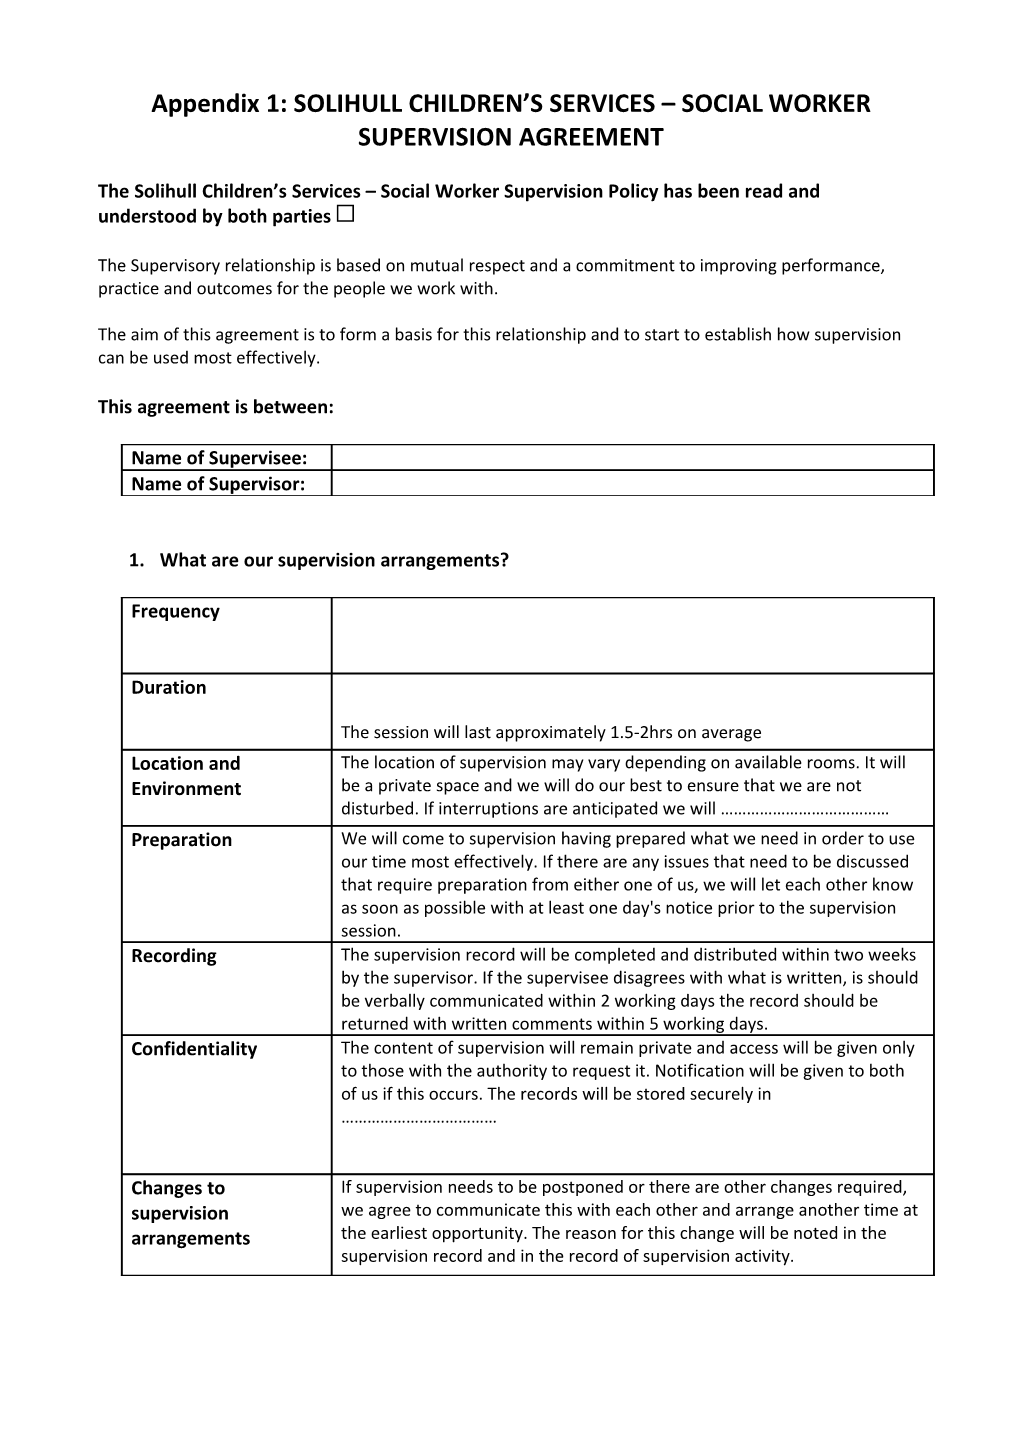 Appendix 1: SOLIHULL CHILDREN S SERVICES SOCIALWORKER SUPERVISION AGREEMENT